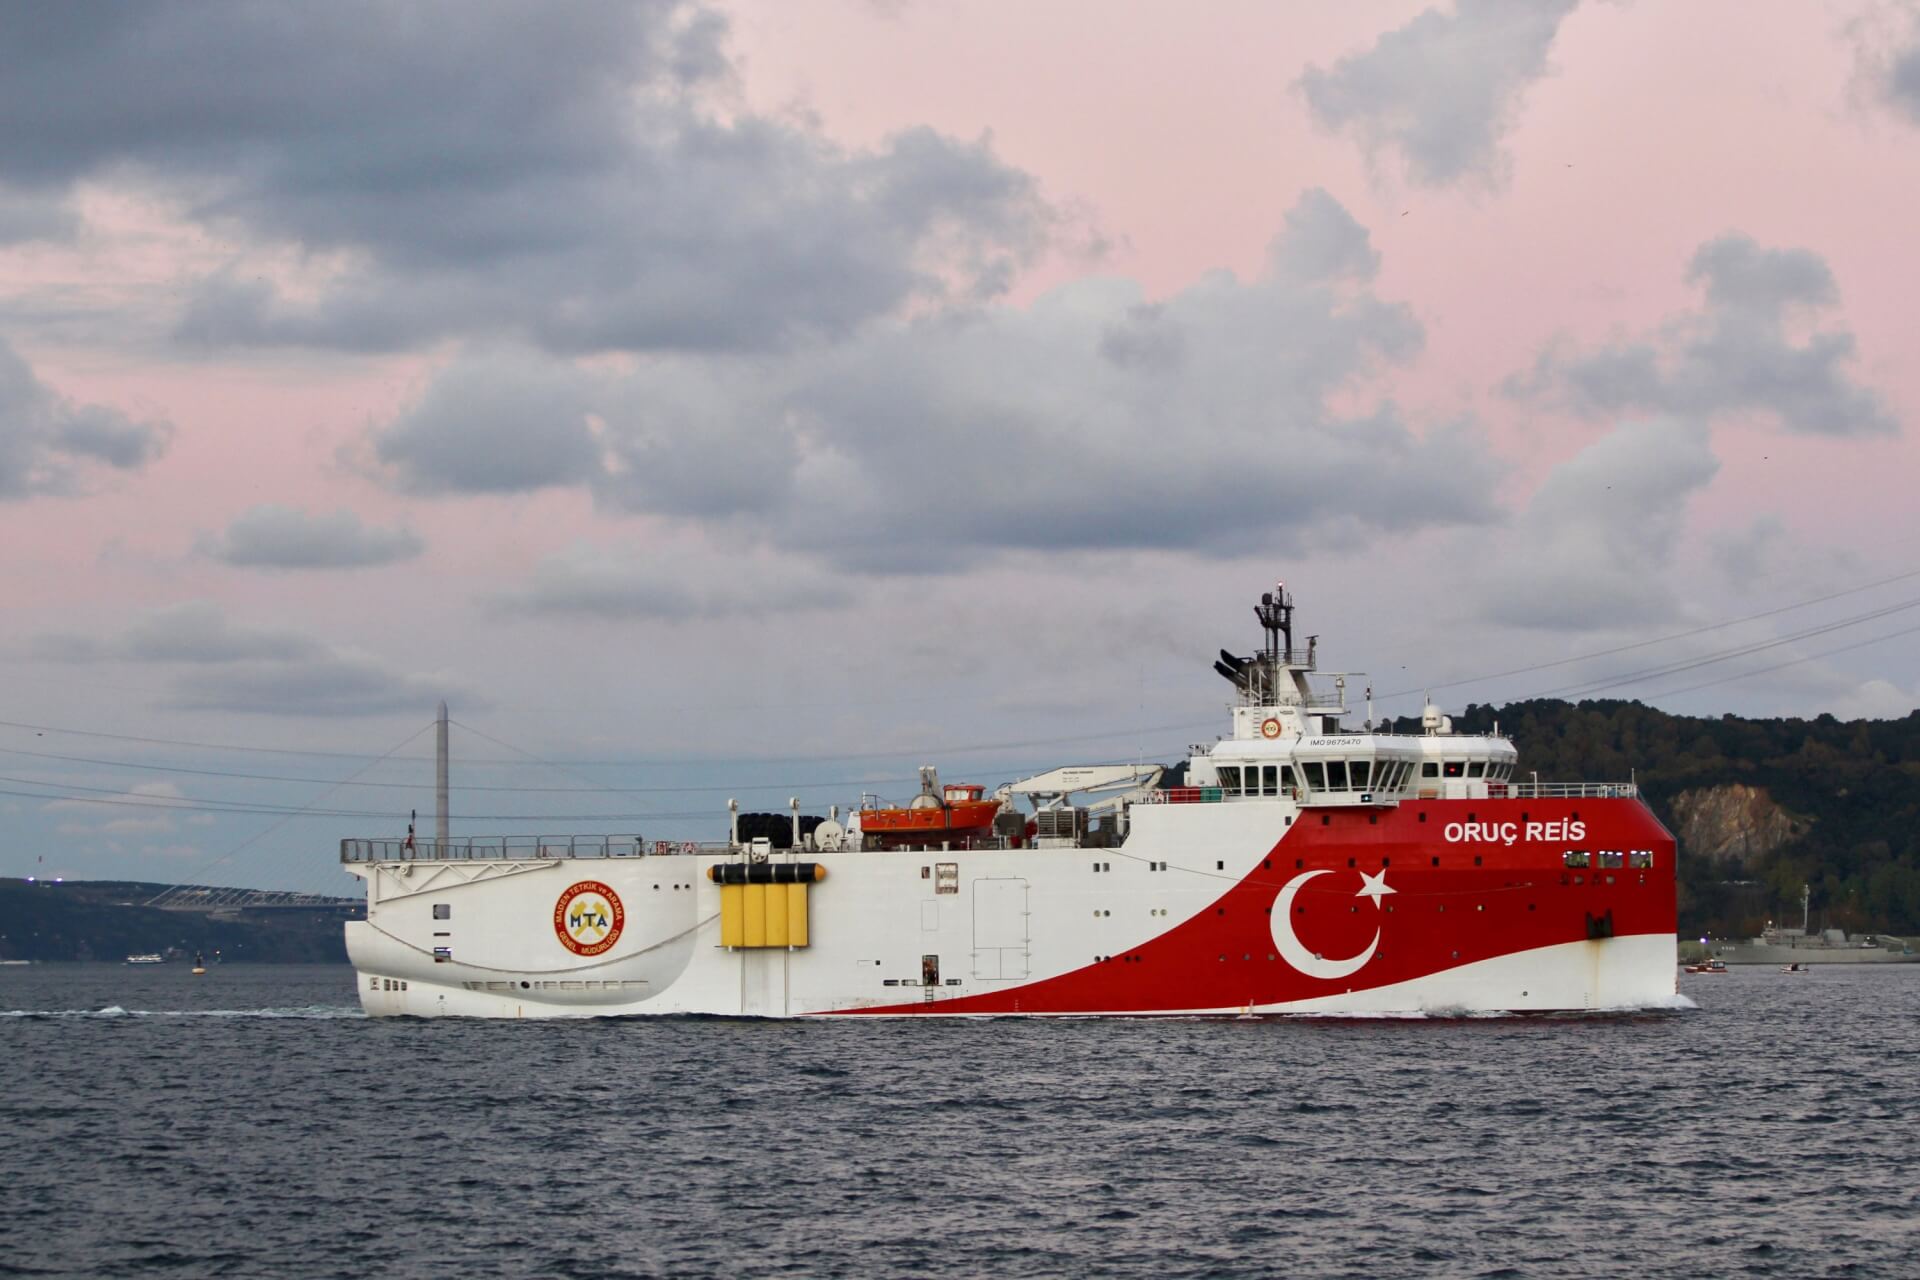 Re-Extension of Turkey’s Oruç Reis Research Mission Escalates Tensions With Greece Again